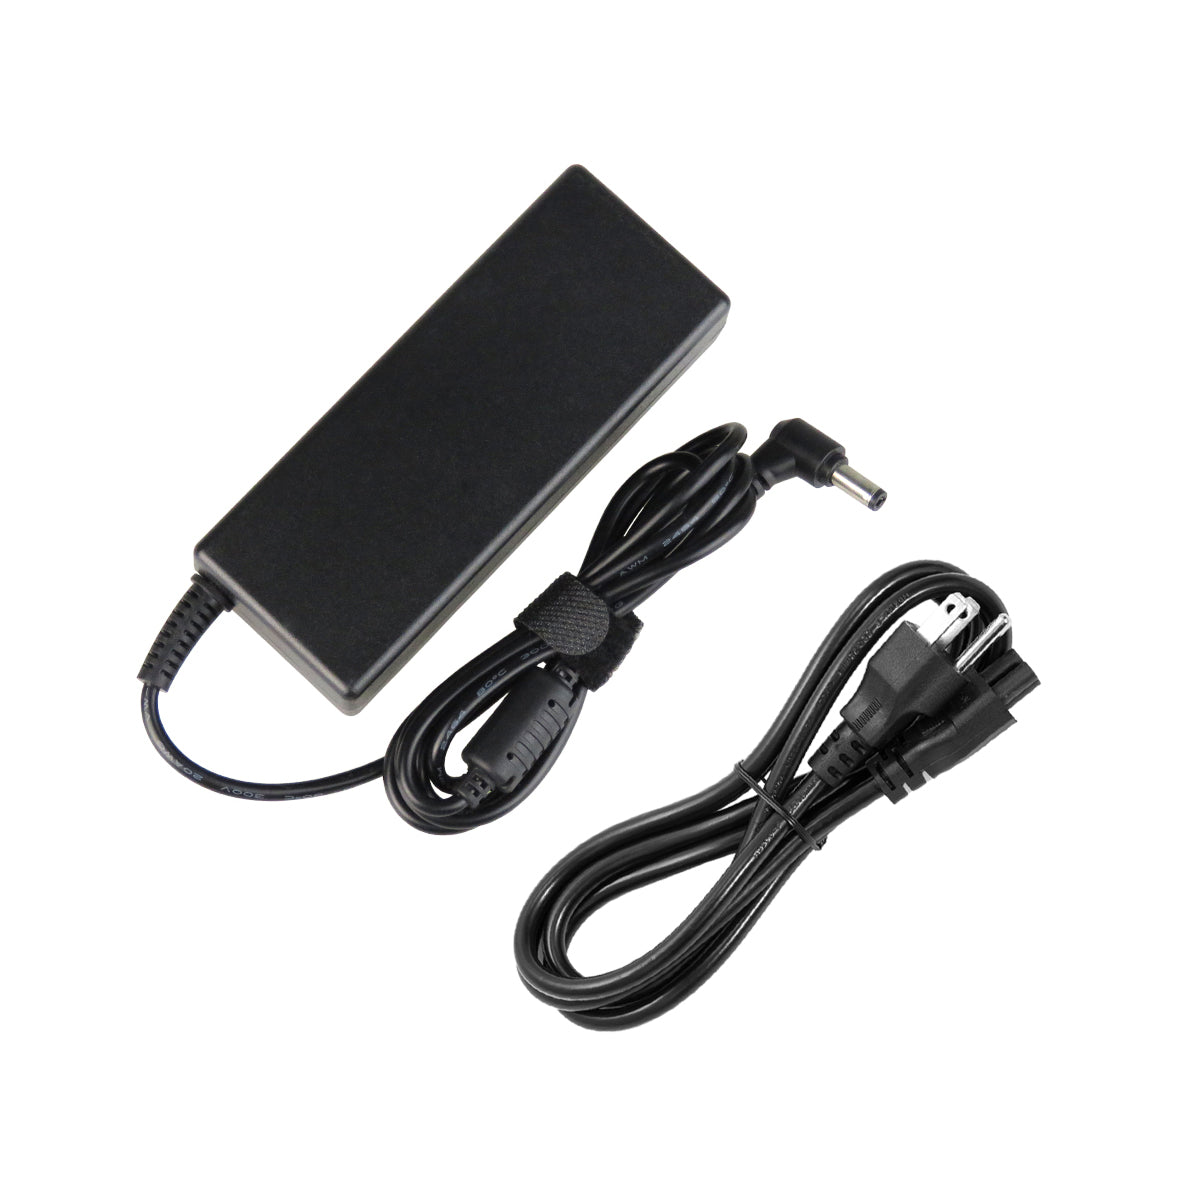 AC Adapter Charger for ASUS A8Sg Laptop.